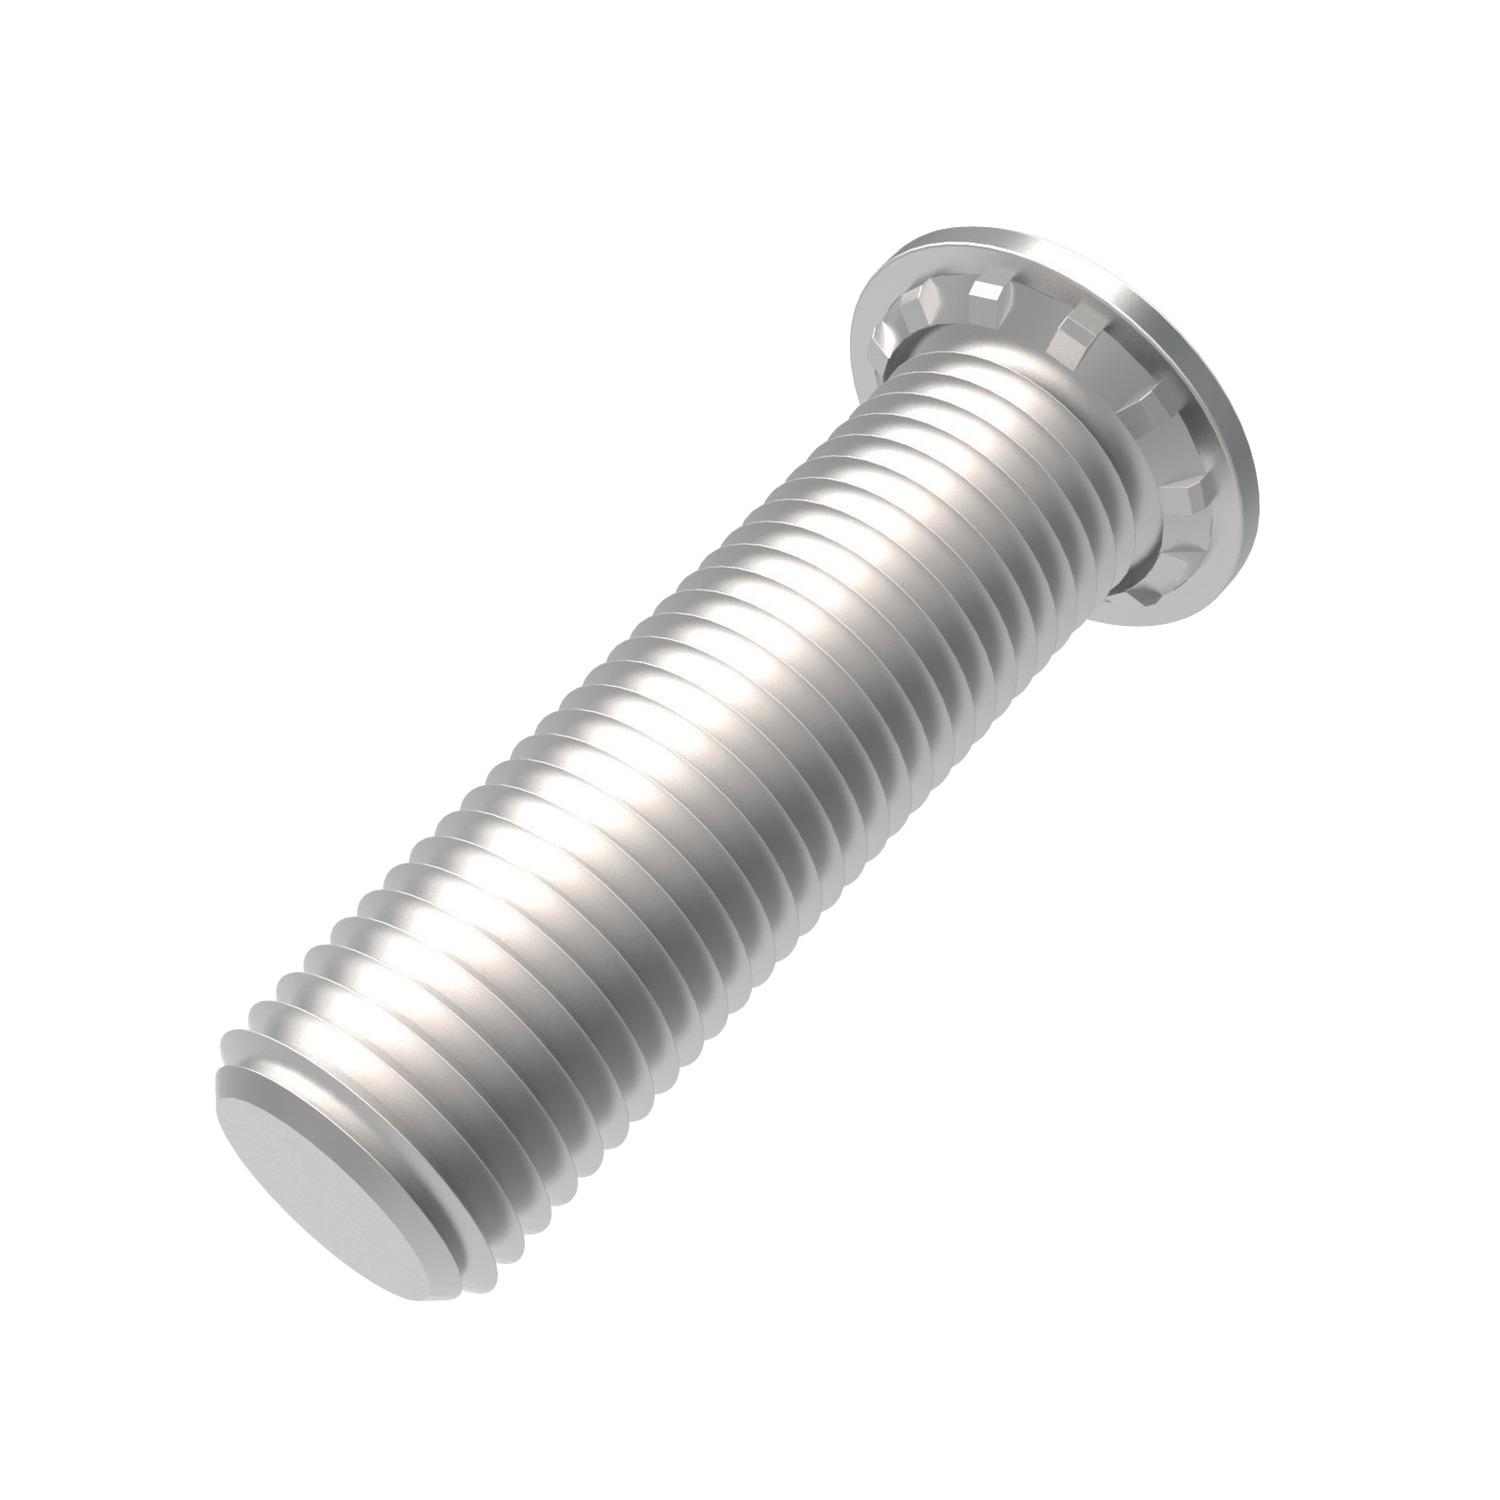 Product P0835.ZP, Clinch Studs Steel, zinc-plated / 